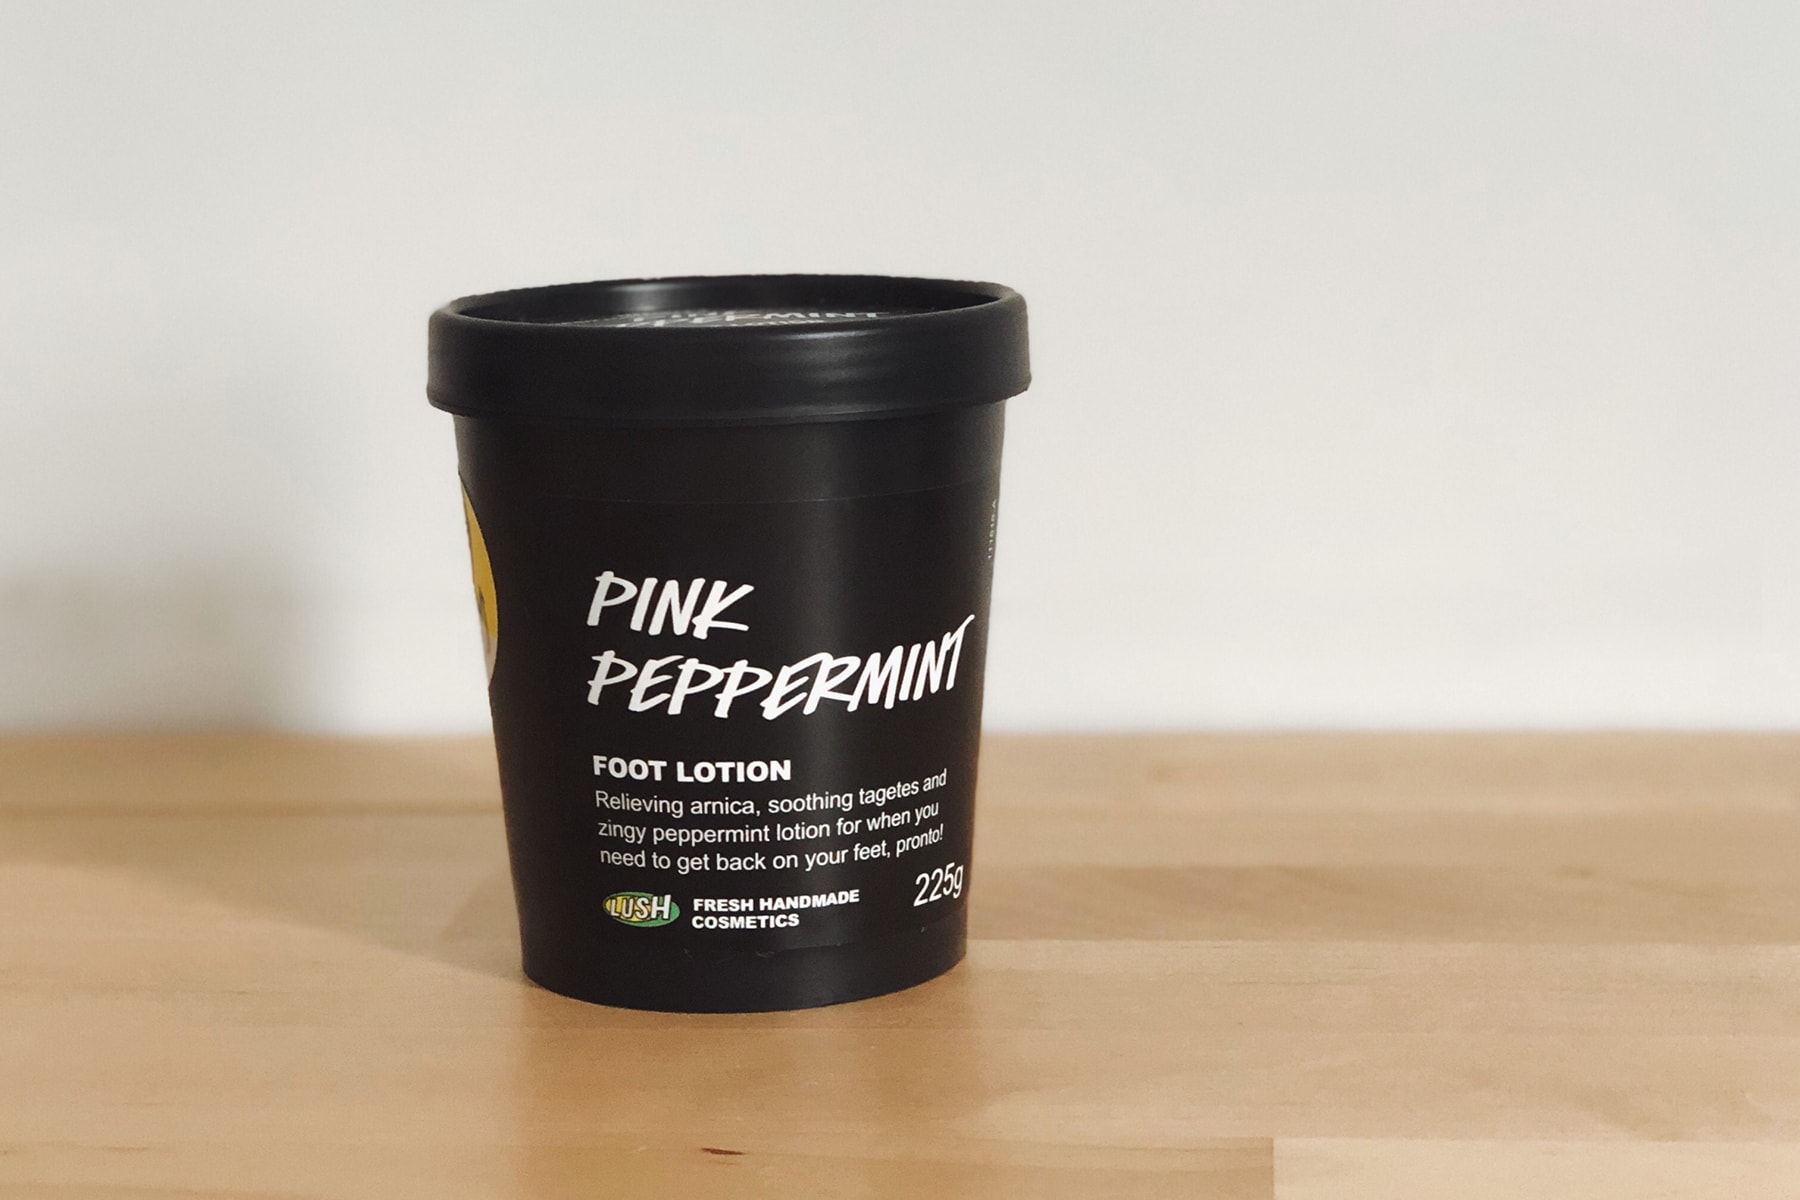 lush cosmetics pink peppermint foot lotion sore feet cracked heels dry winter